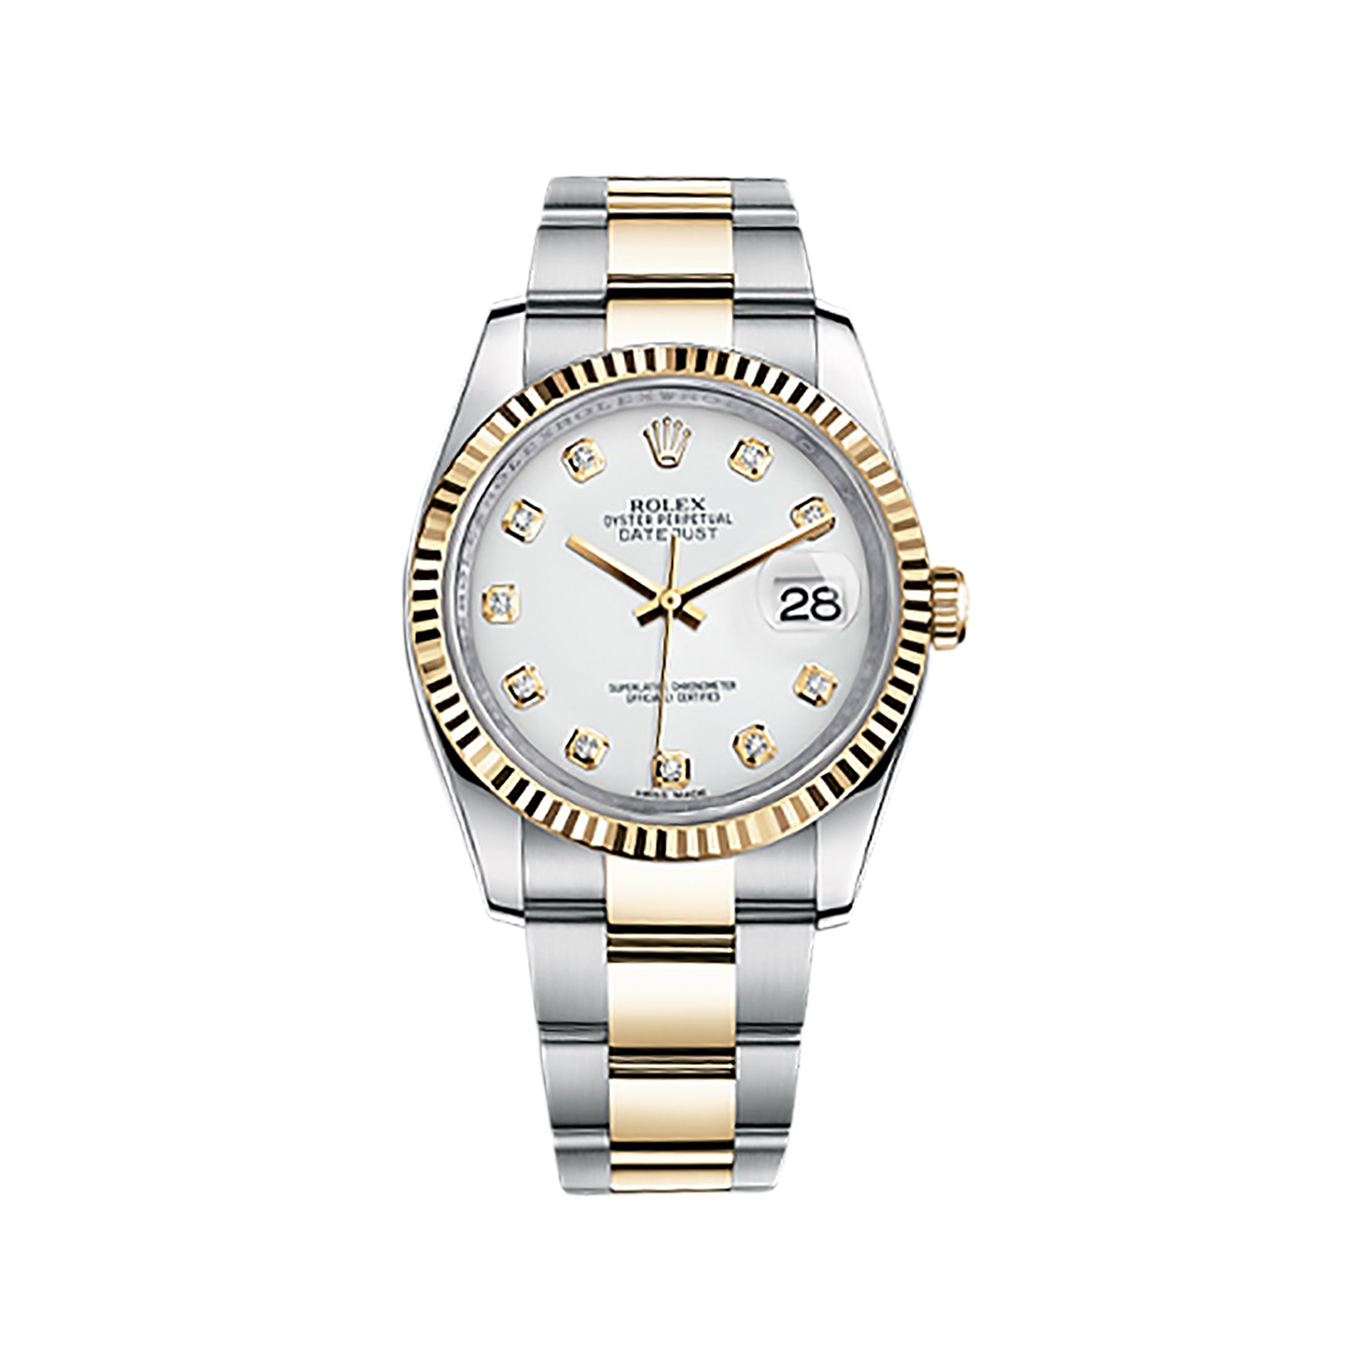 Datejust 36 116233 Gold & Stainless Steel Watch (White Set with Diamonds)